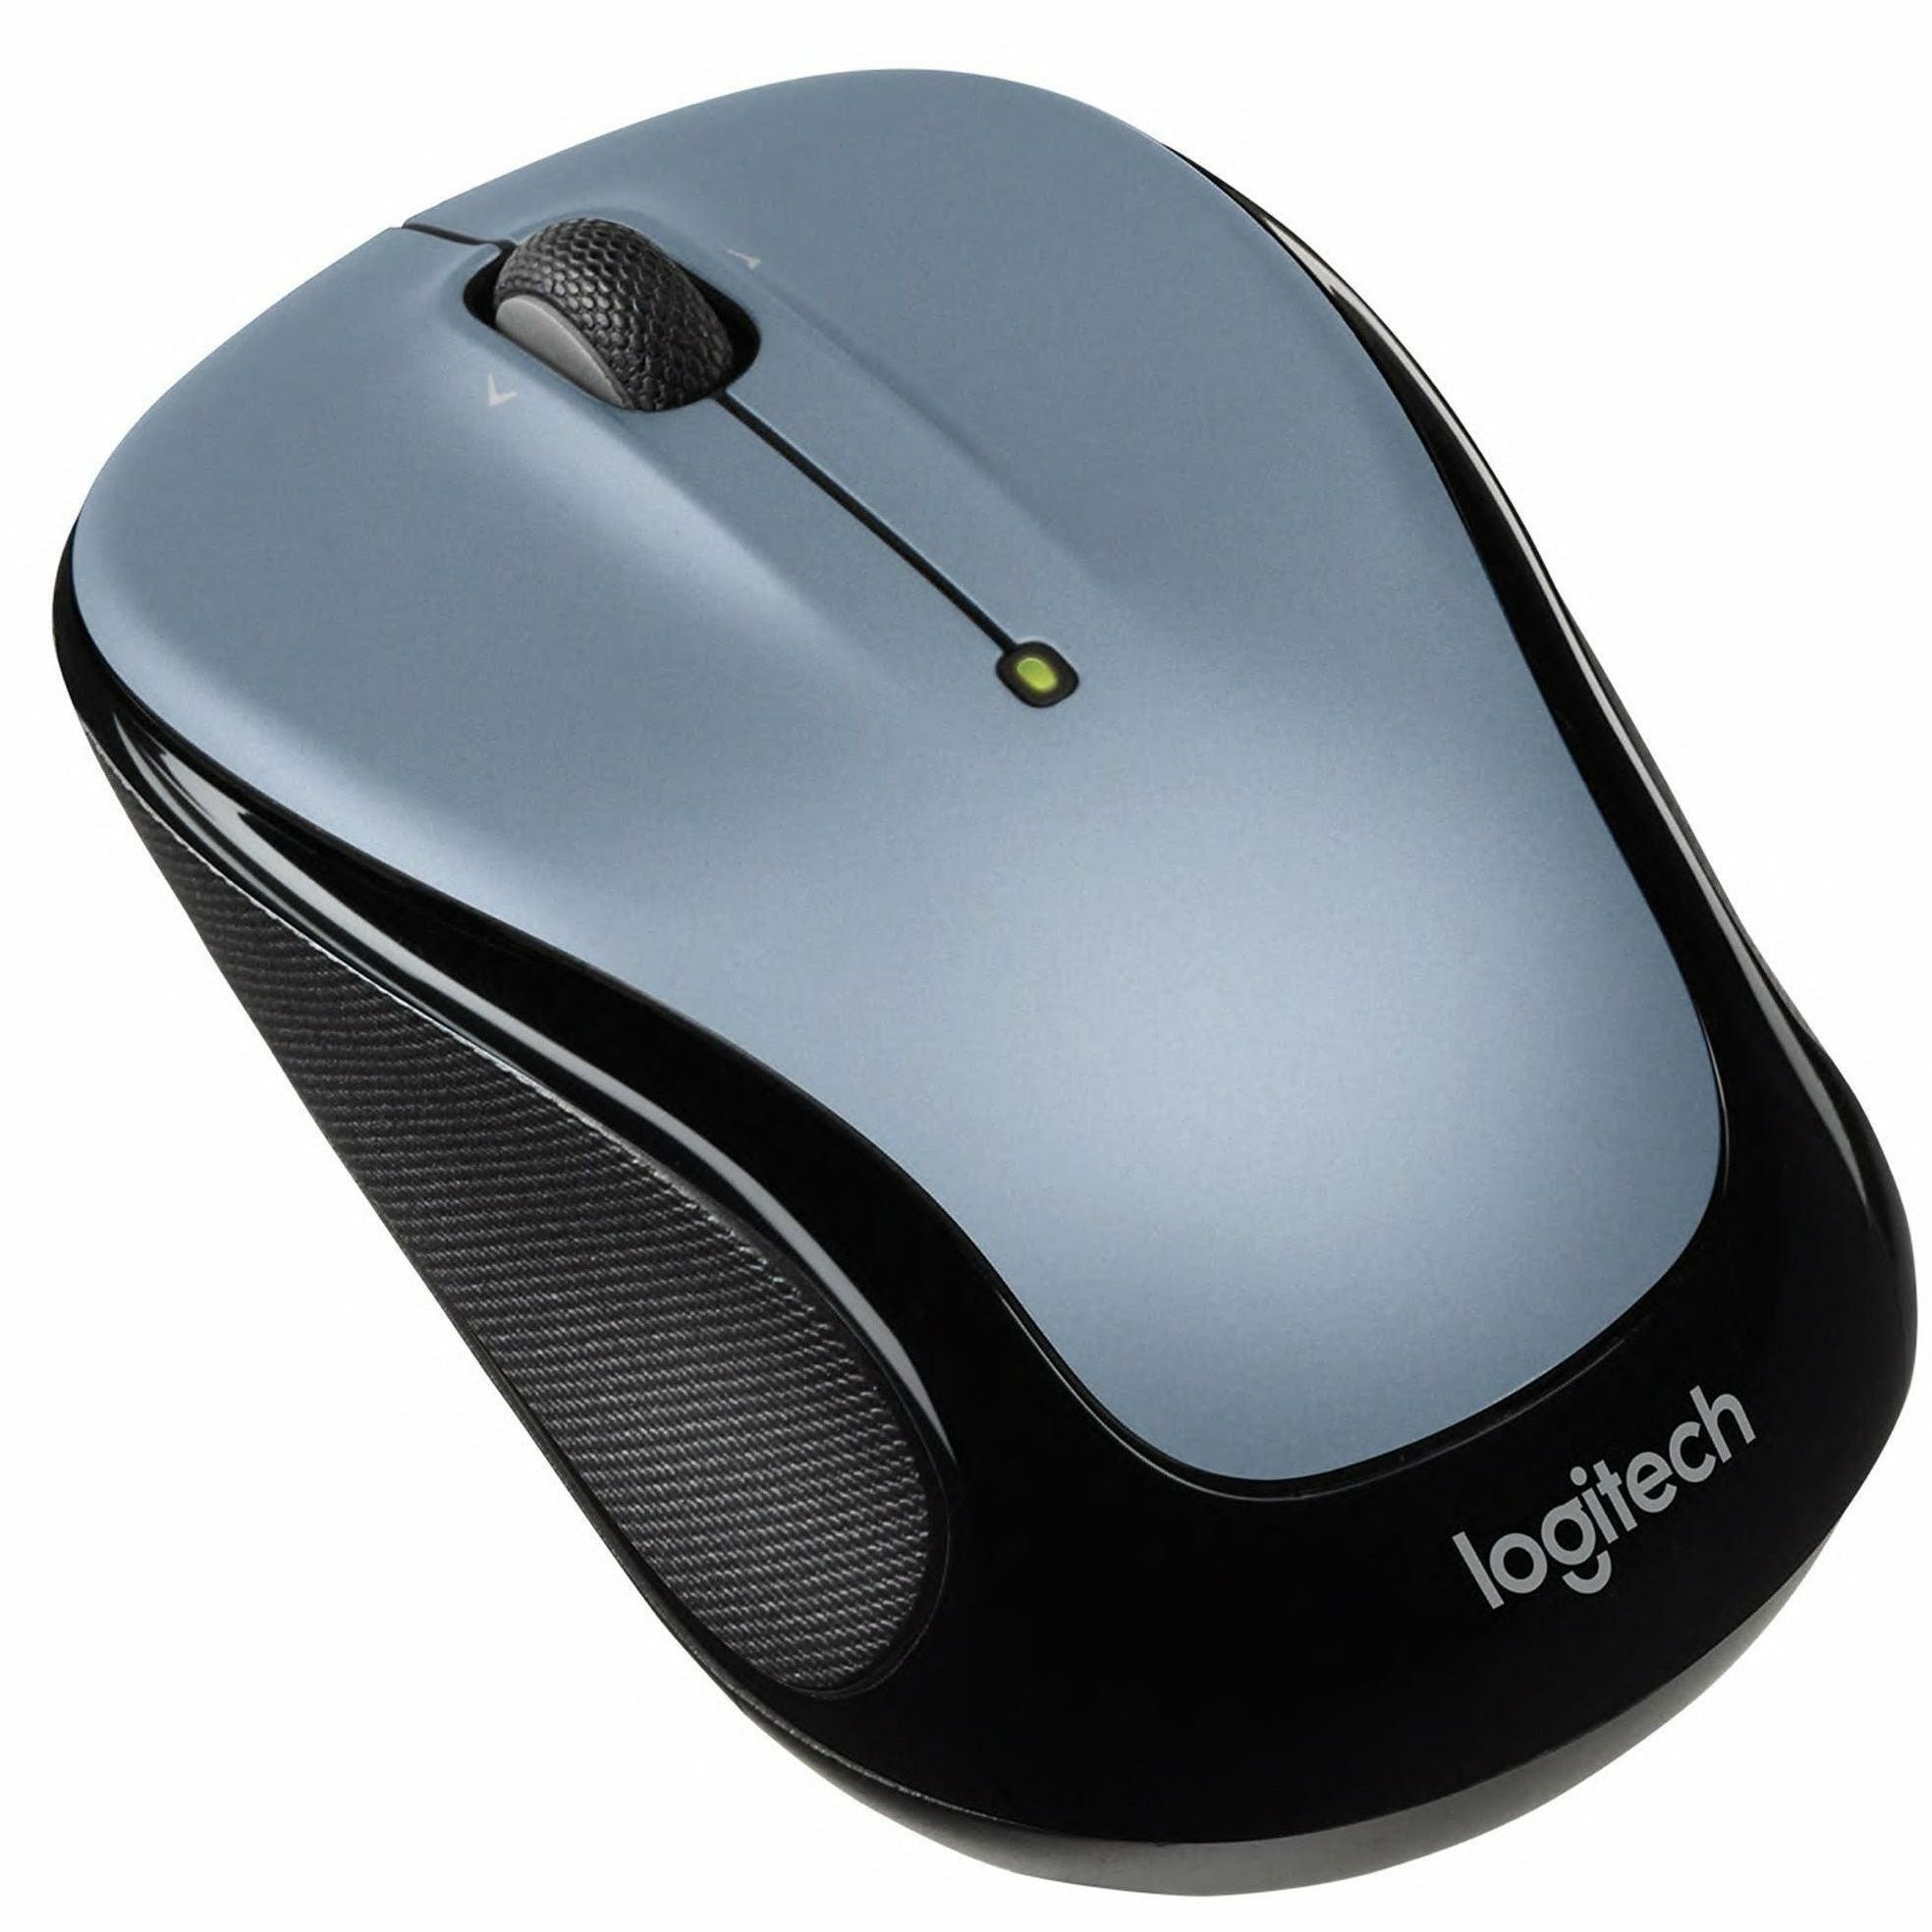 logitech-m325s-wireless-mouse-optical-wireless-radio-frequency-240-ghz-silver-usb-1000-dpi-tilt-wheel-5-buttons-3-programmable-buttons-small-hand-palm-size-symmetrical_log910006824 - 2